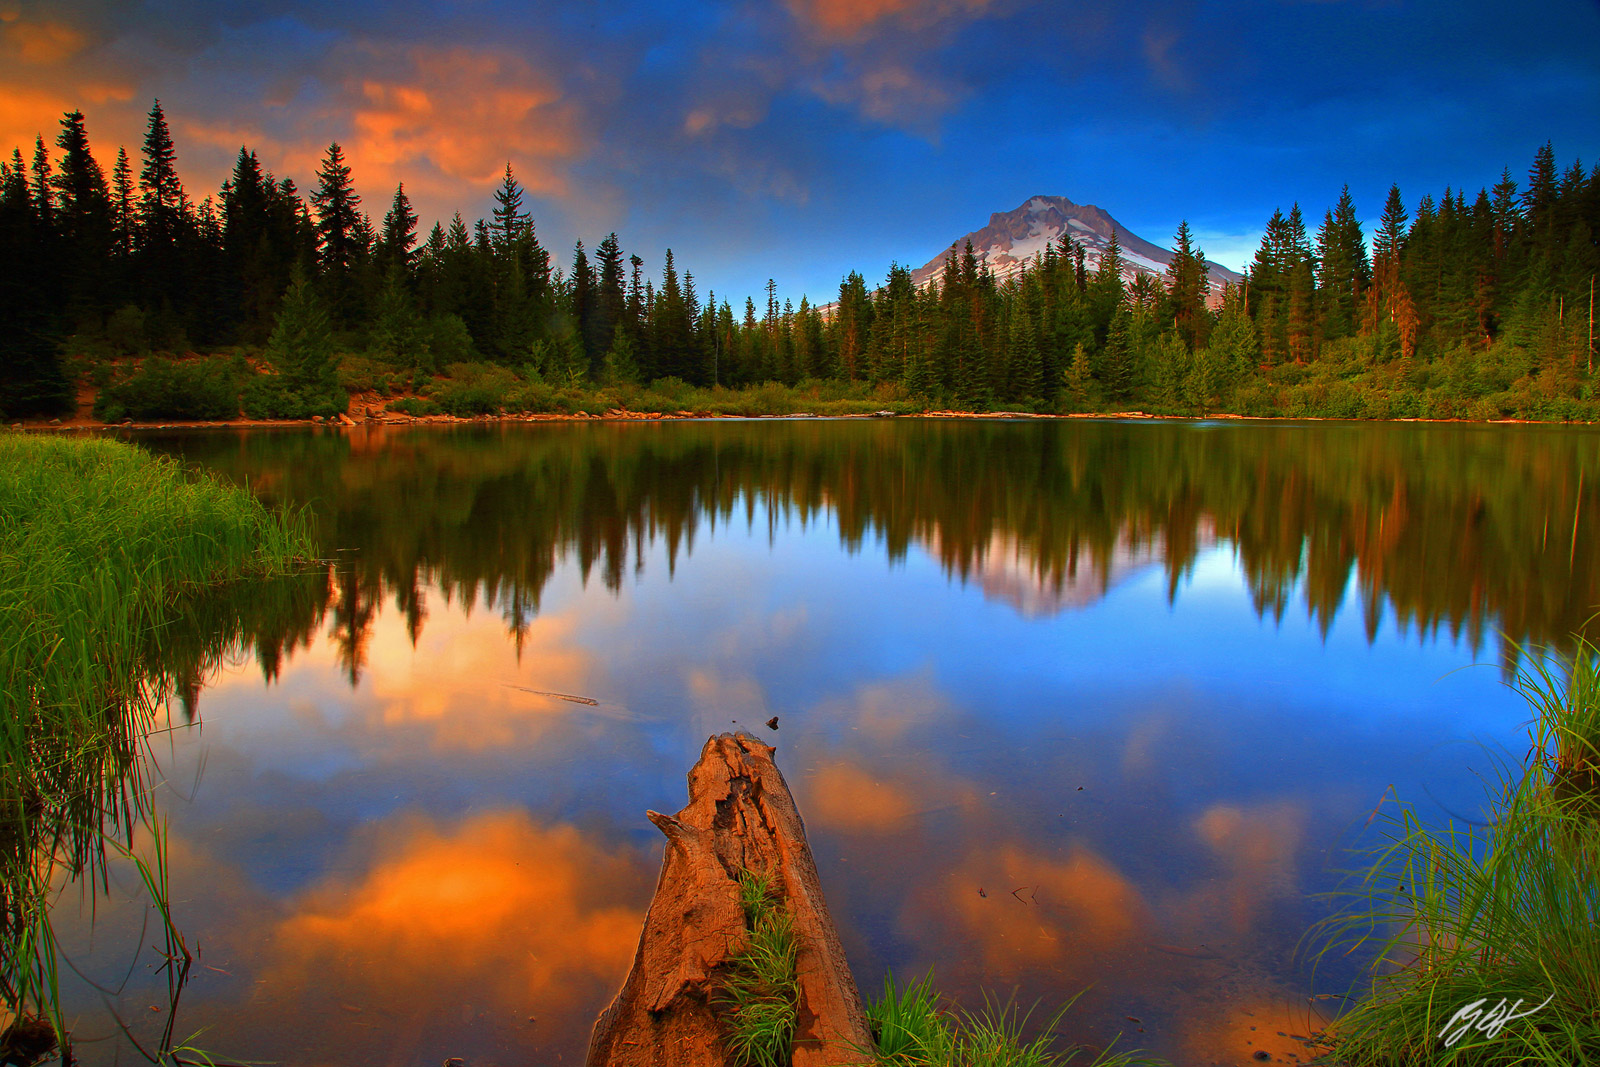 Sunset Mt Hood Reflected in Mirror Lake, Mt Hood National Forest in Washington